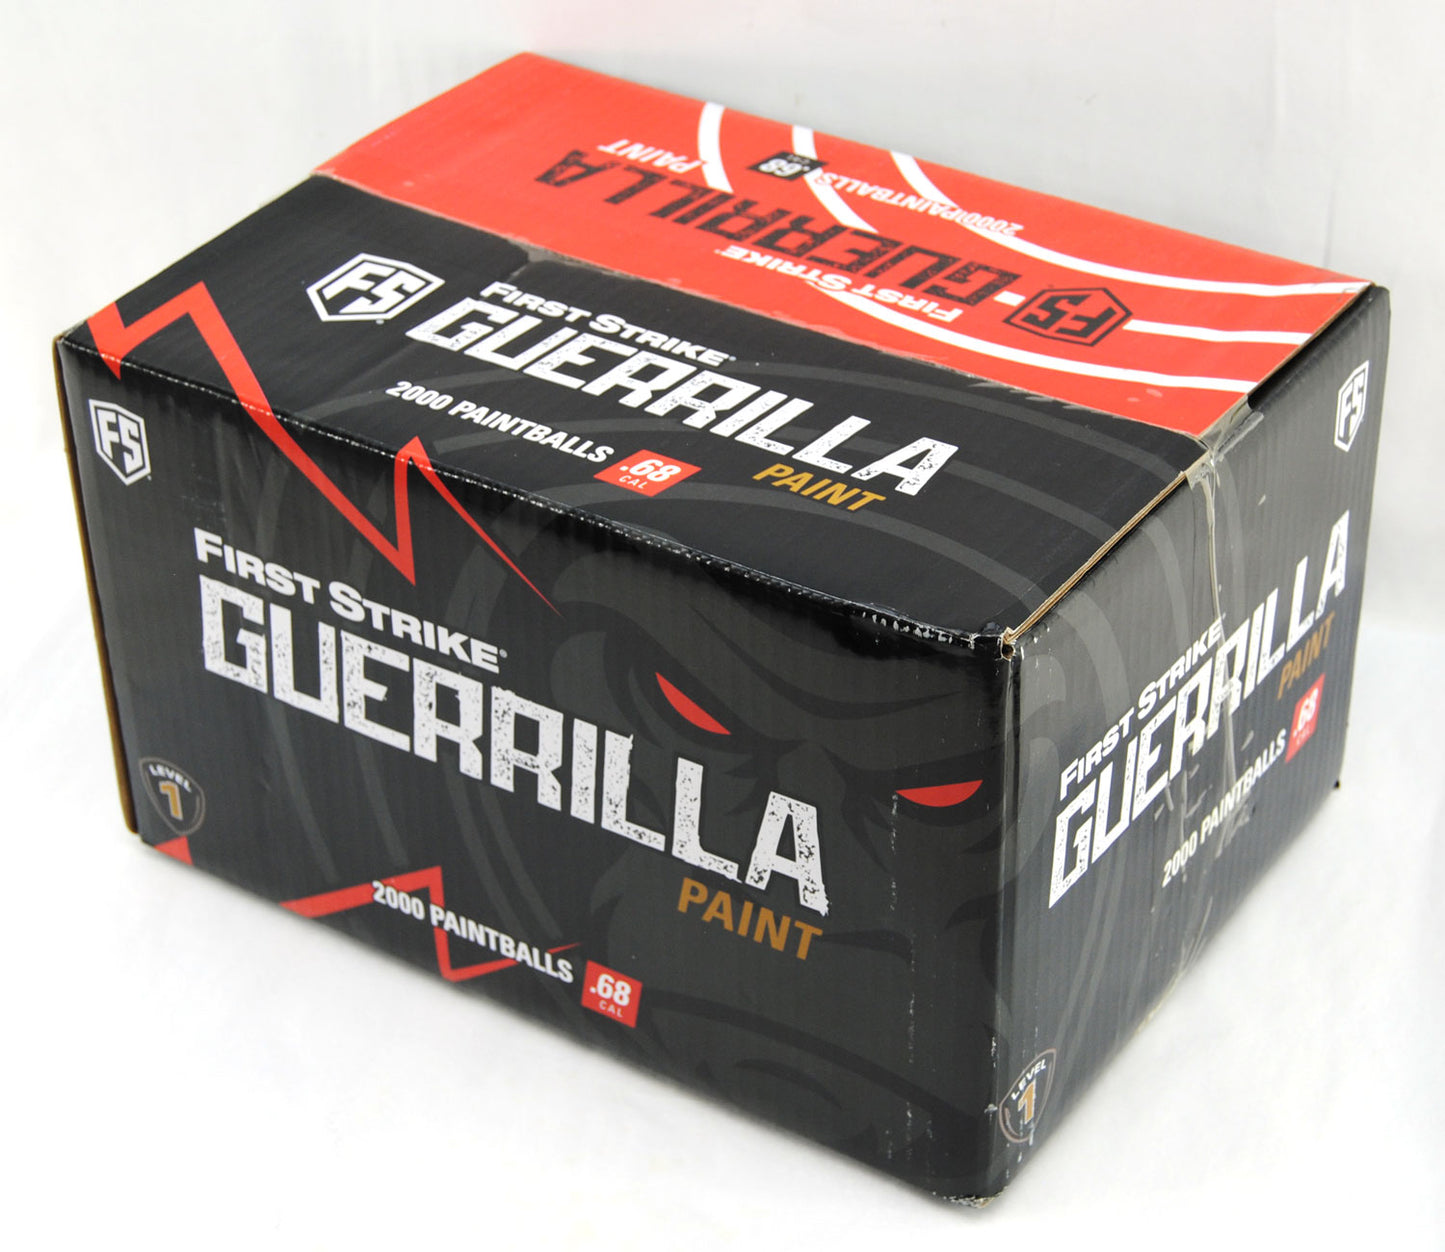 First Strike Guerrilla Paintballs 2000 Count Box - Lime Shell / Lime Fill - First Strike